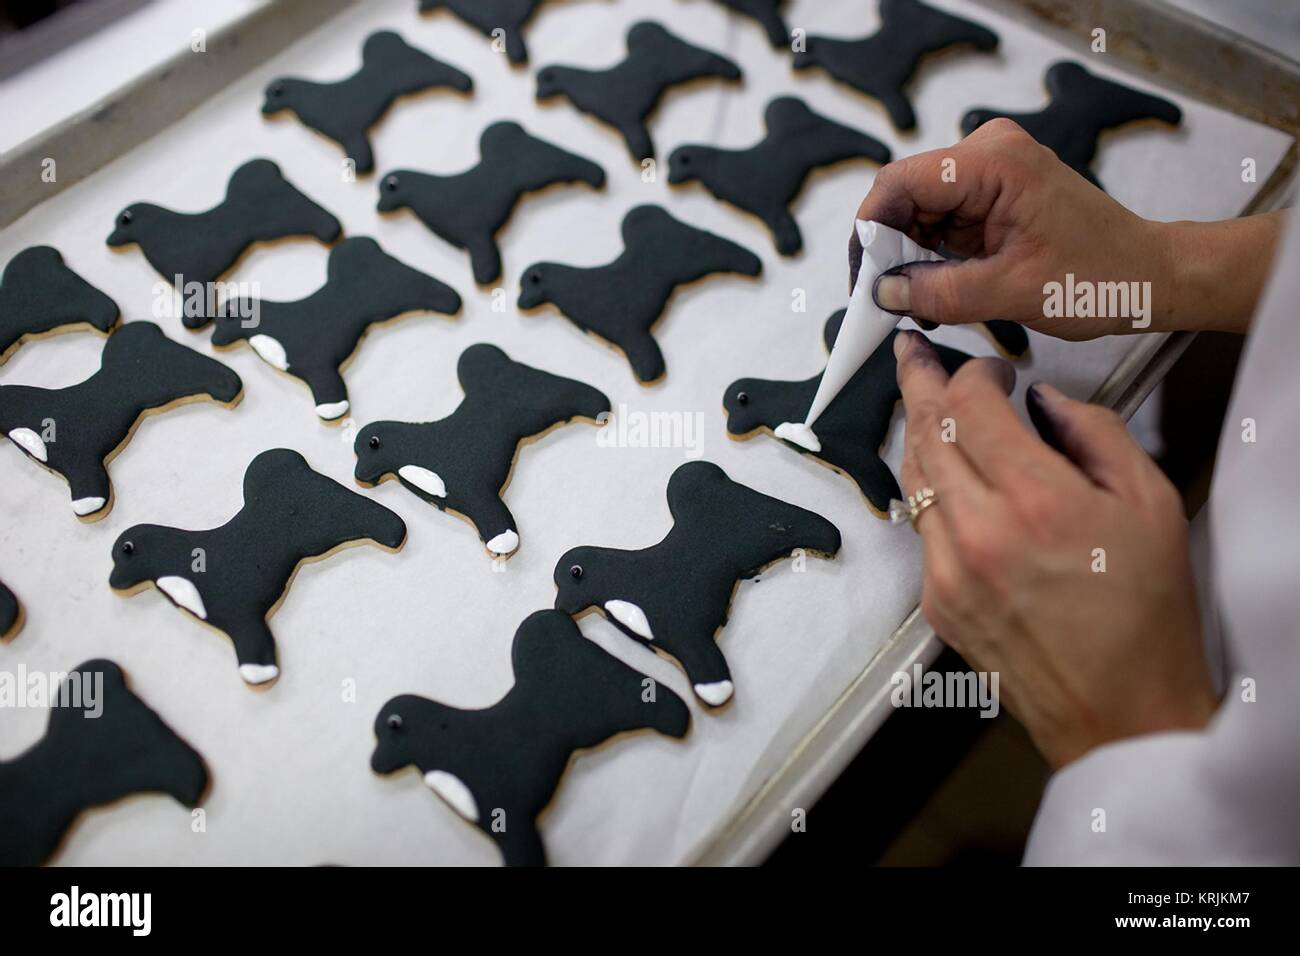 White House pastry chefs decorate cookies shaped like U.S. President Barack Obama family dog Bo at the White House December 8, 2010 in Washington, DC. Stock Photo